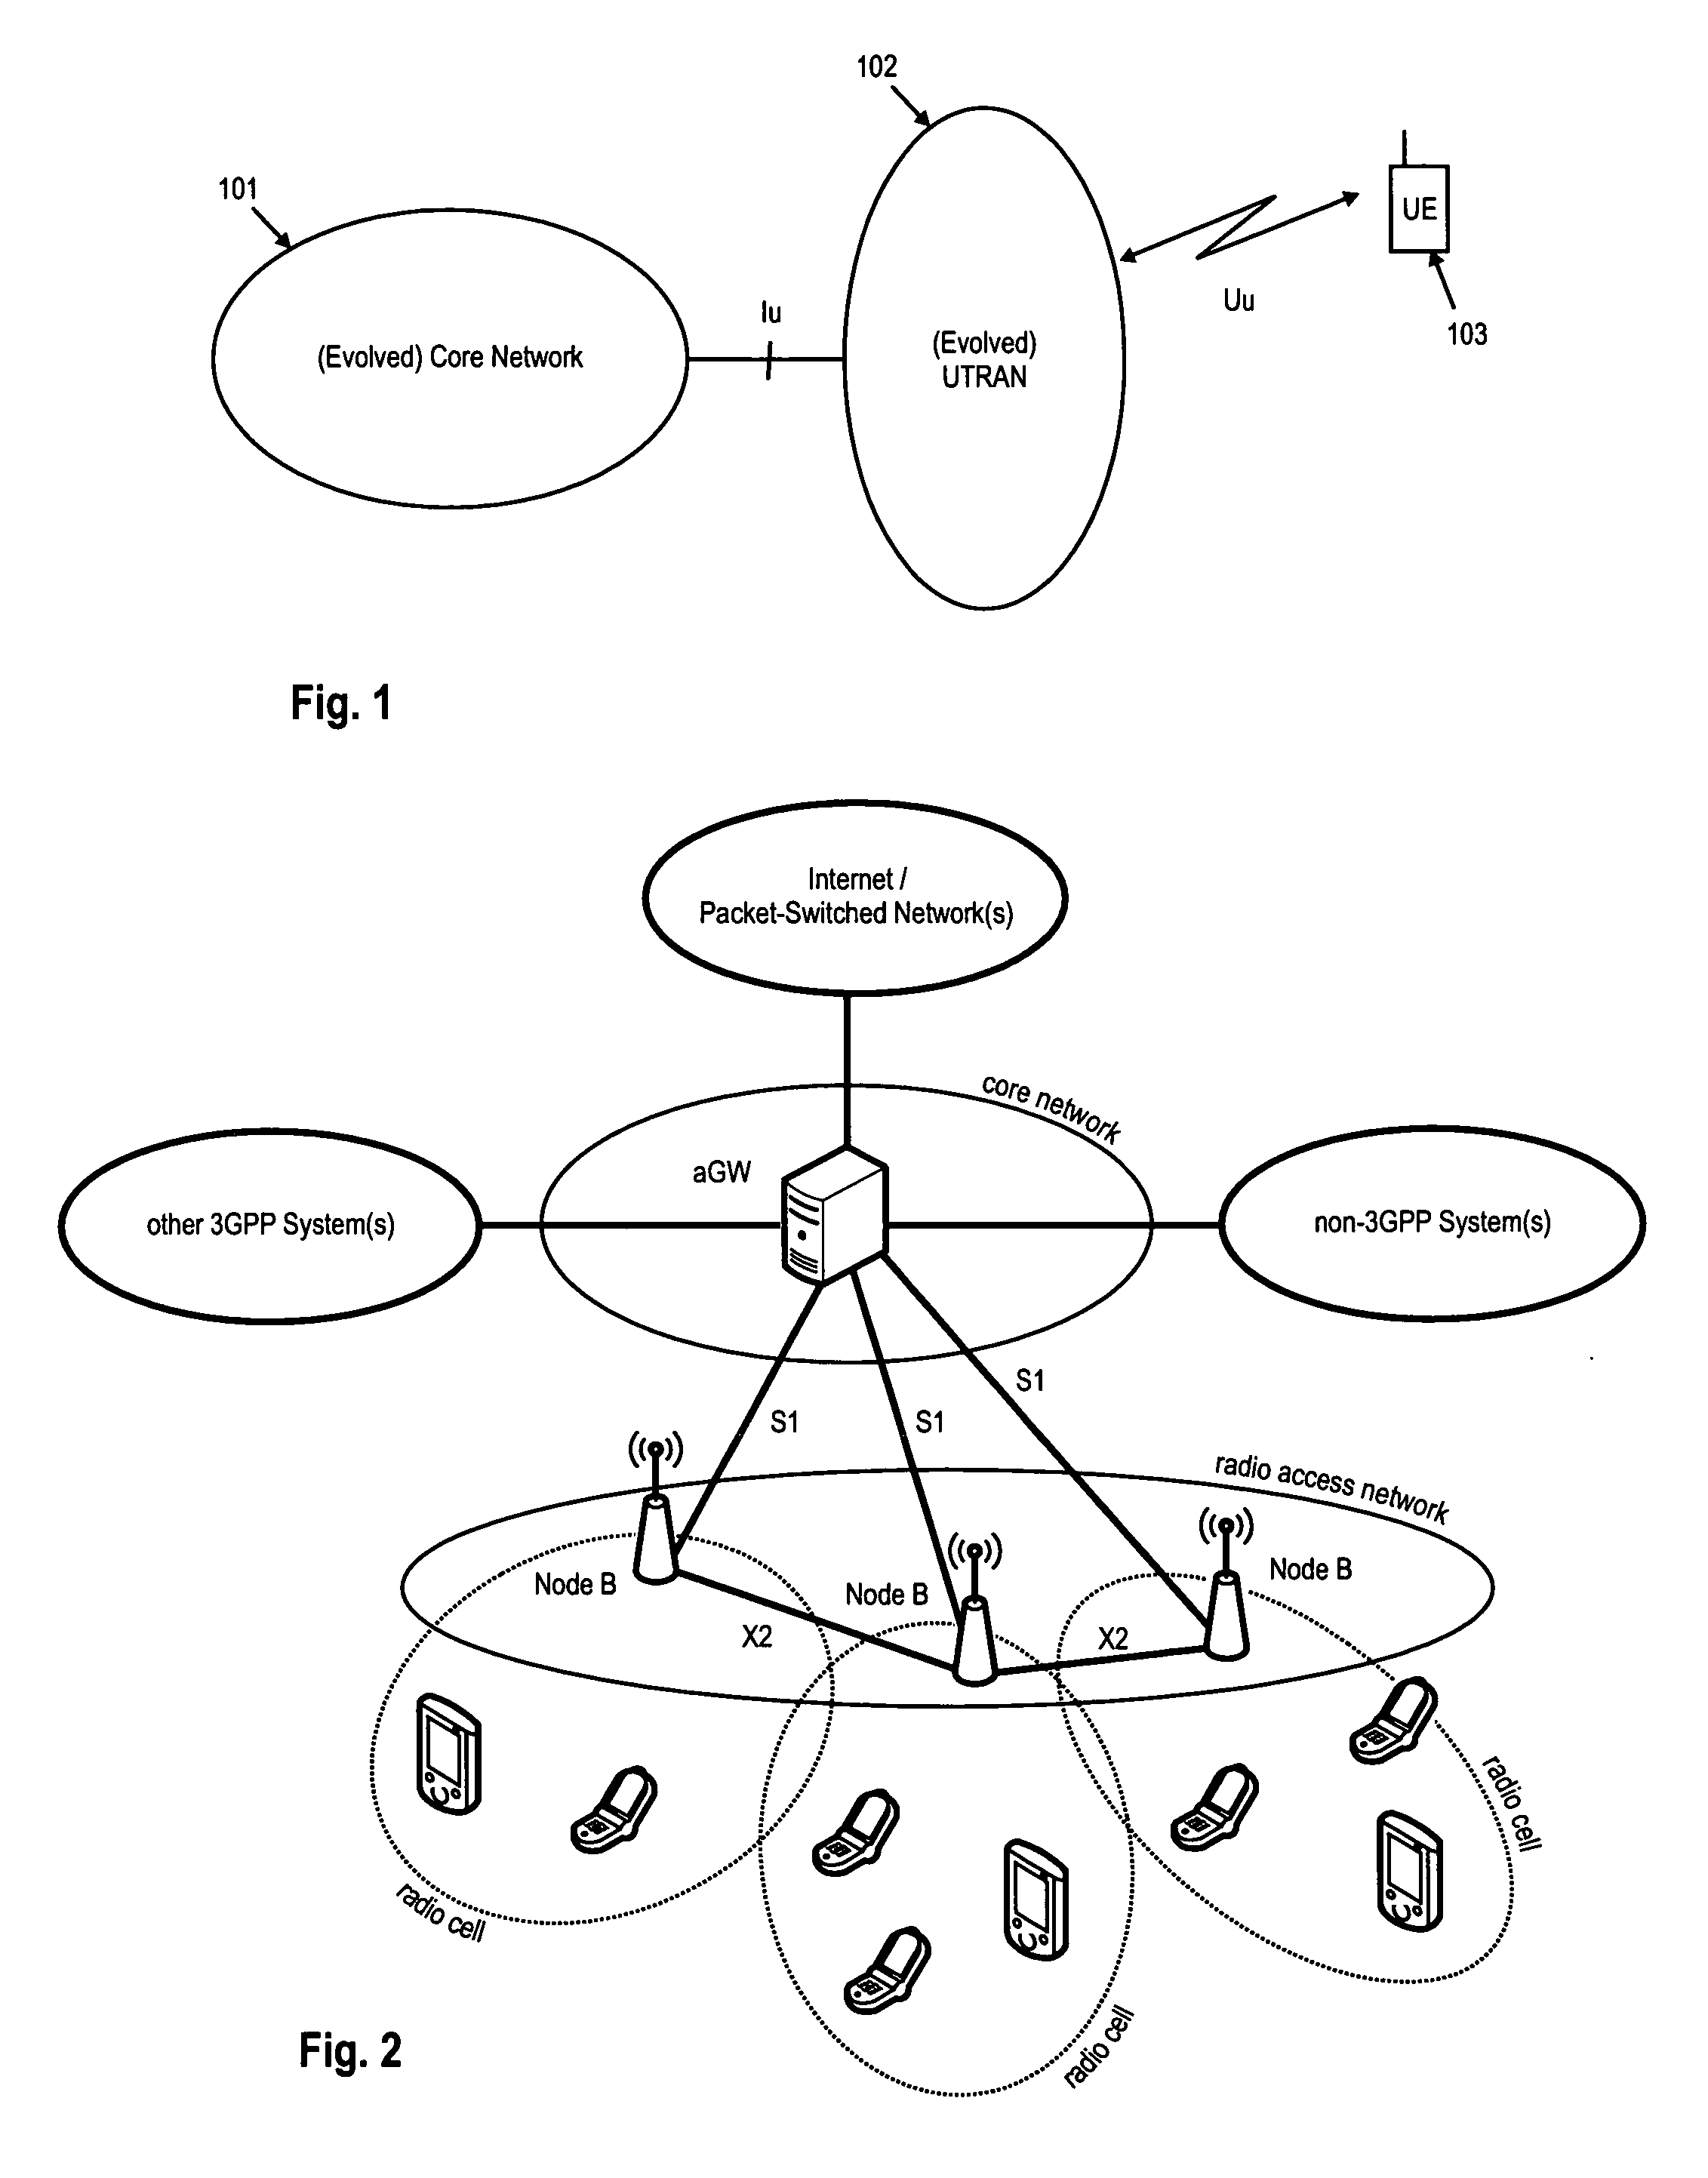 Transmission and reception of system information upon changing connectivity or point of attachment in a mobile communication system